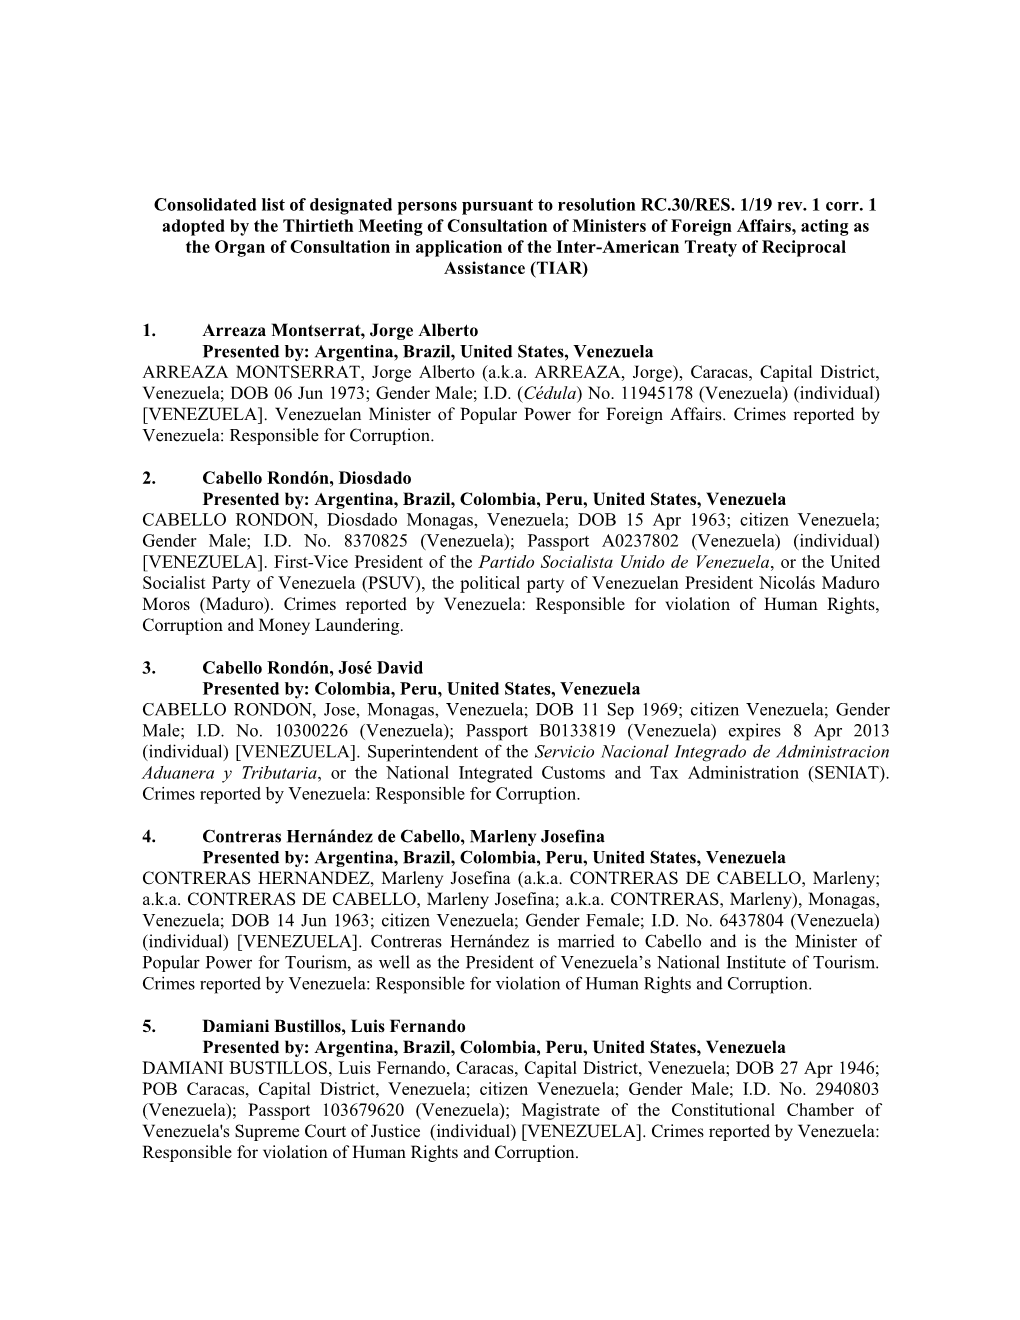 Consolidated List of Designated Persons Pursuant to Resolution RC.30/RES